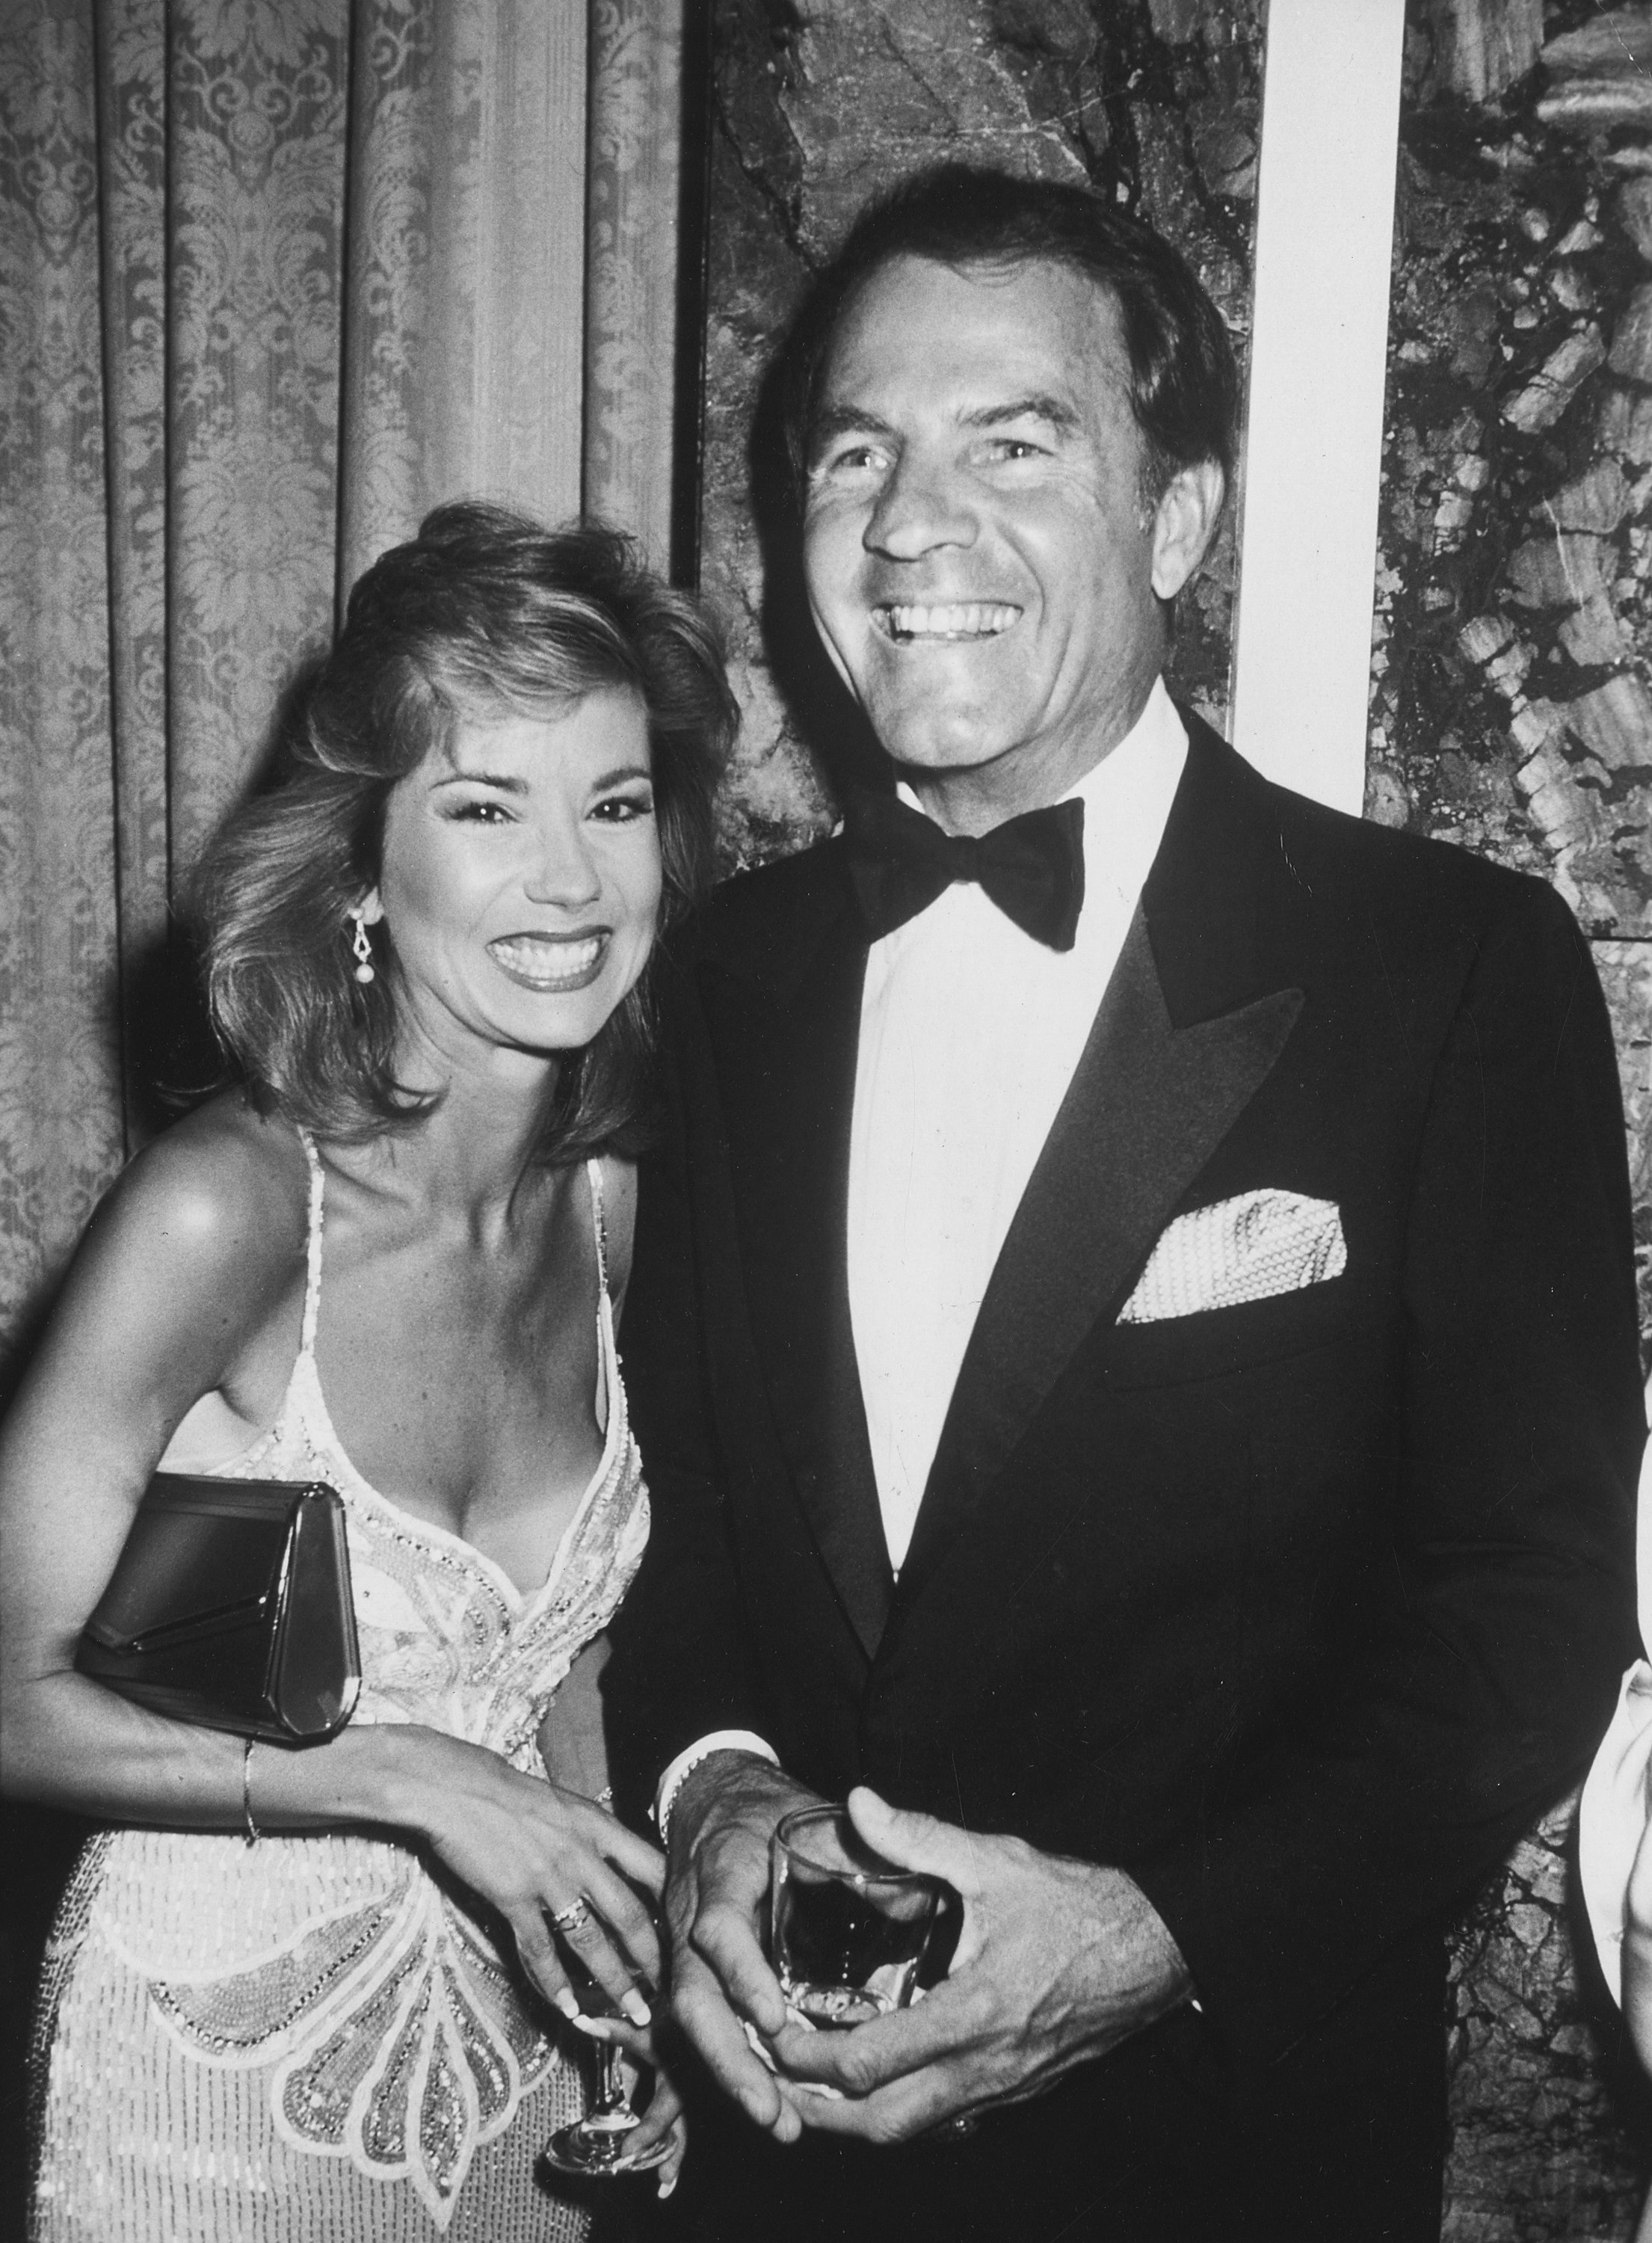 Kathie Lee Johnson and Frank Gifford at the B'nai B'rith International Awards Dinner on June 24, 1986, in New York City. | Source: Getty Images